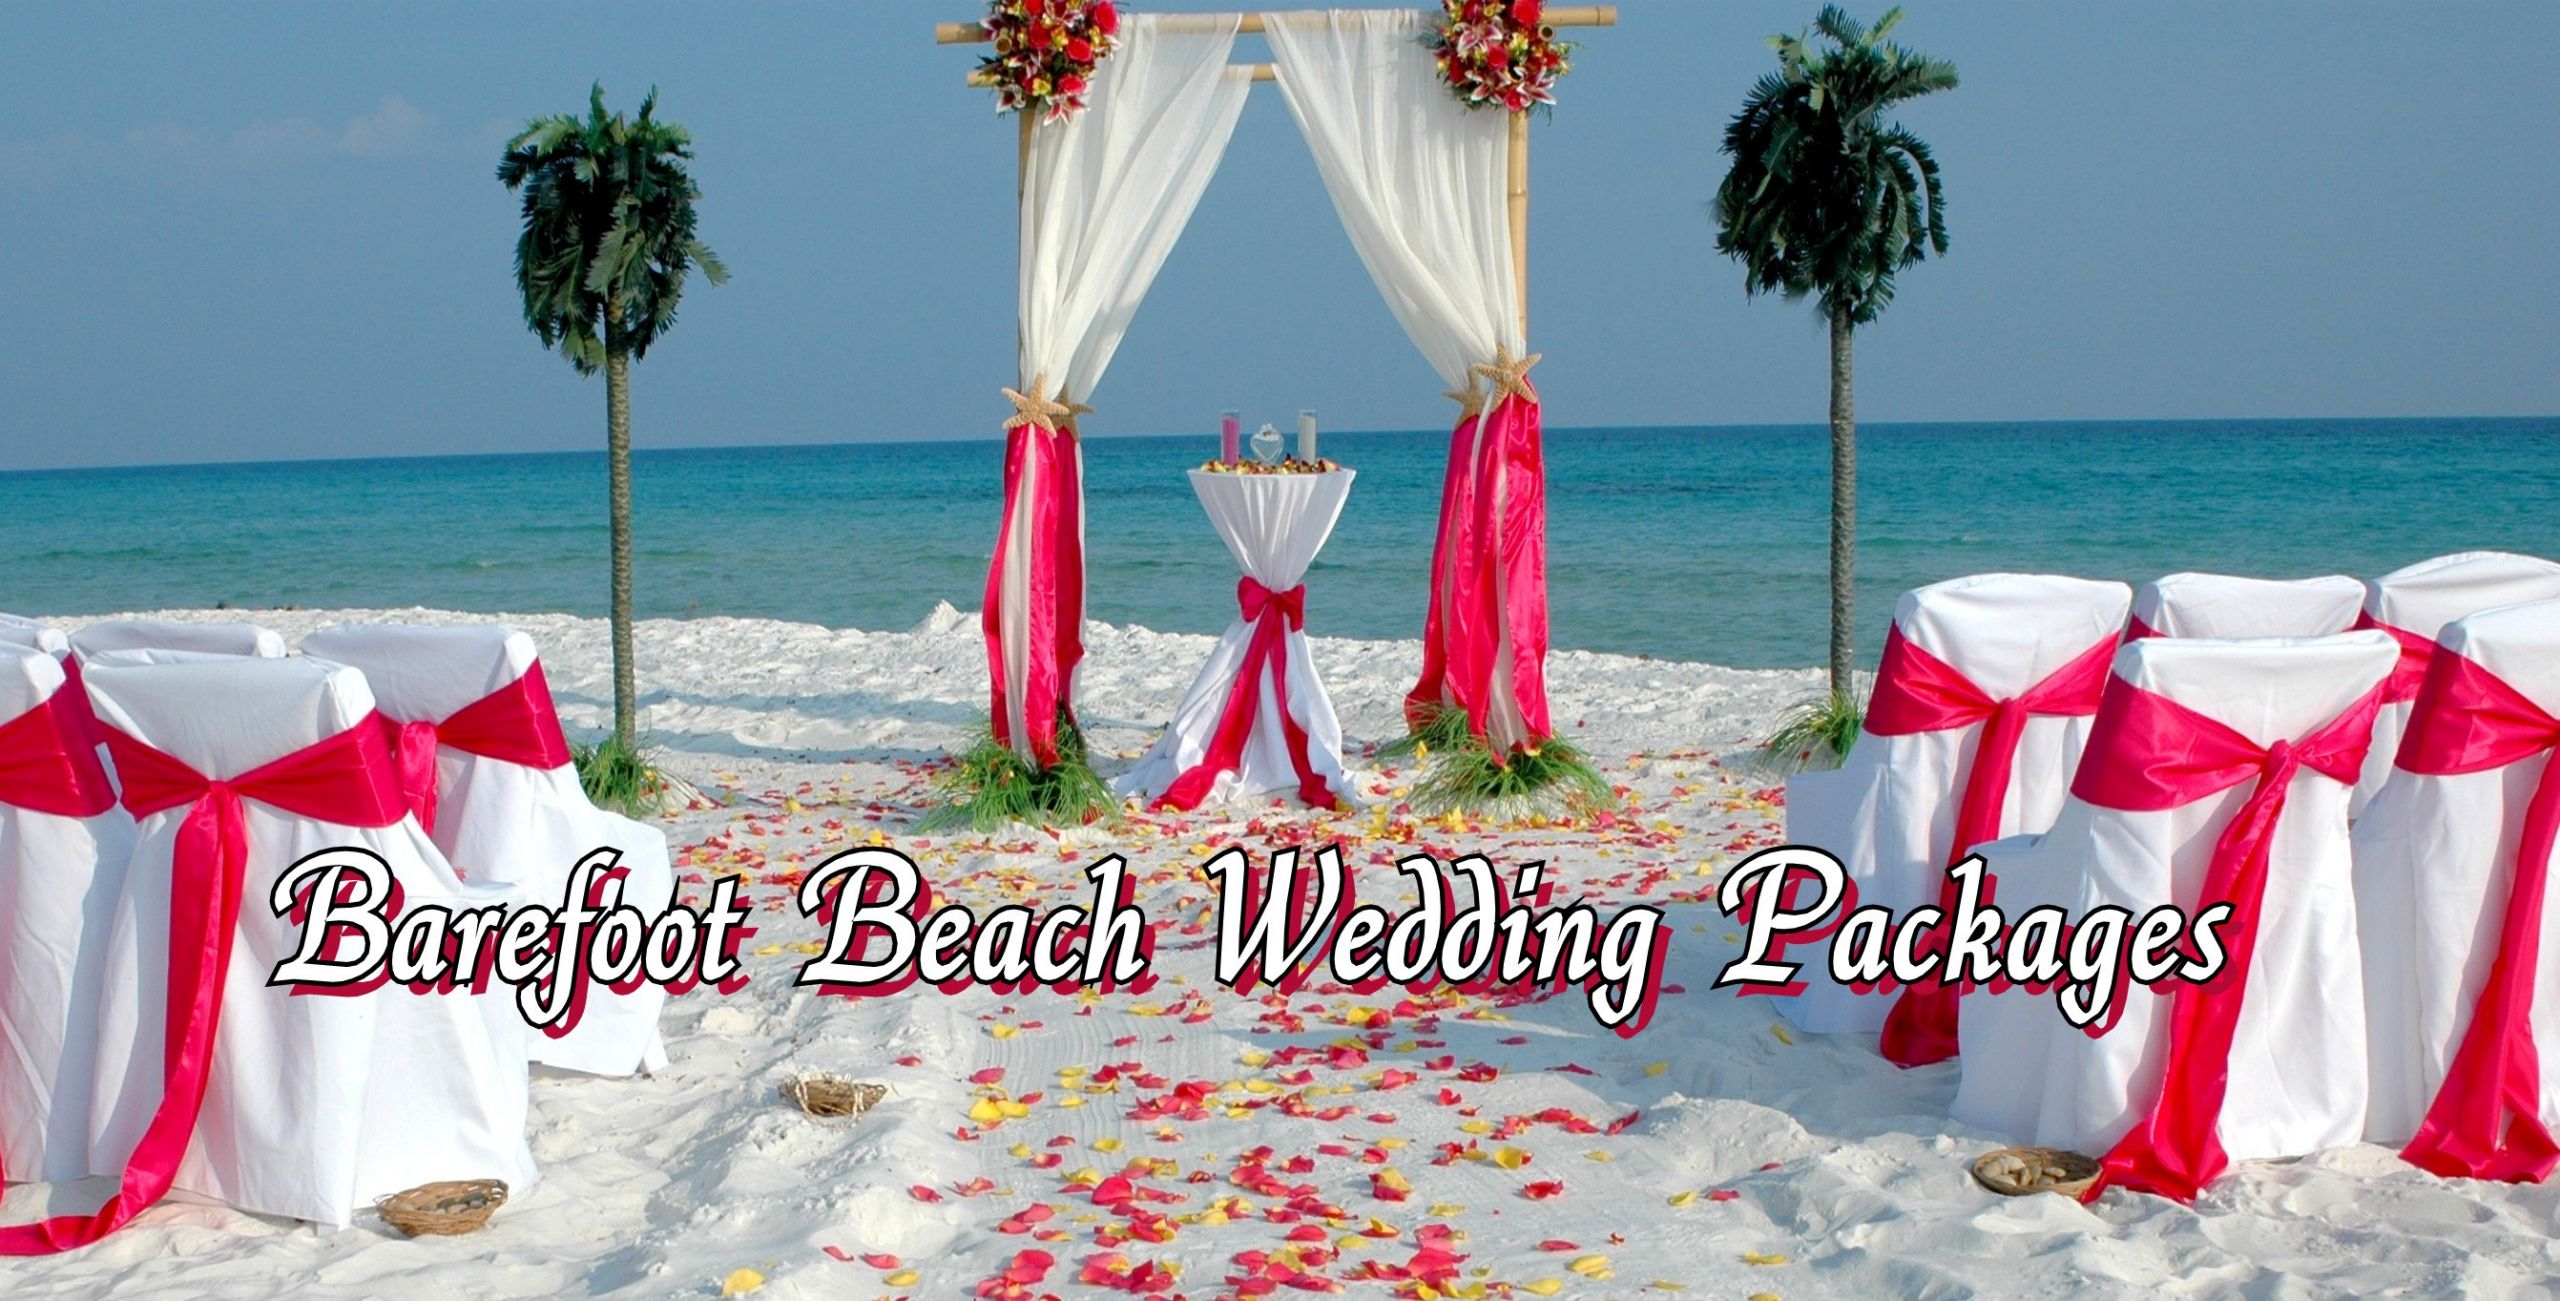 Beach Wedding Packages In Florida
 Florida Barefoot Bamboo Arbor Beach Wedding Packages